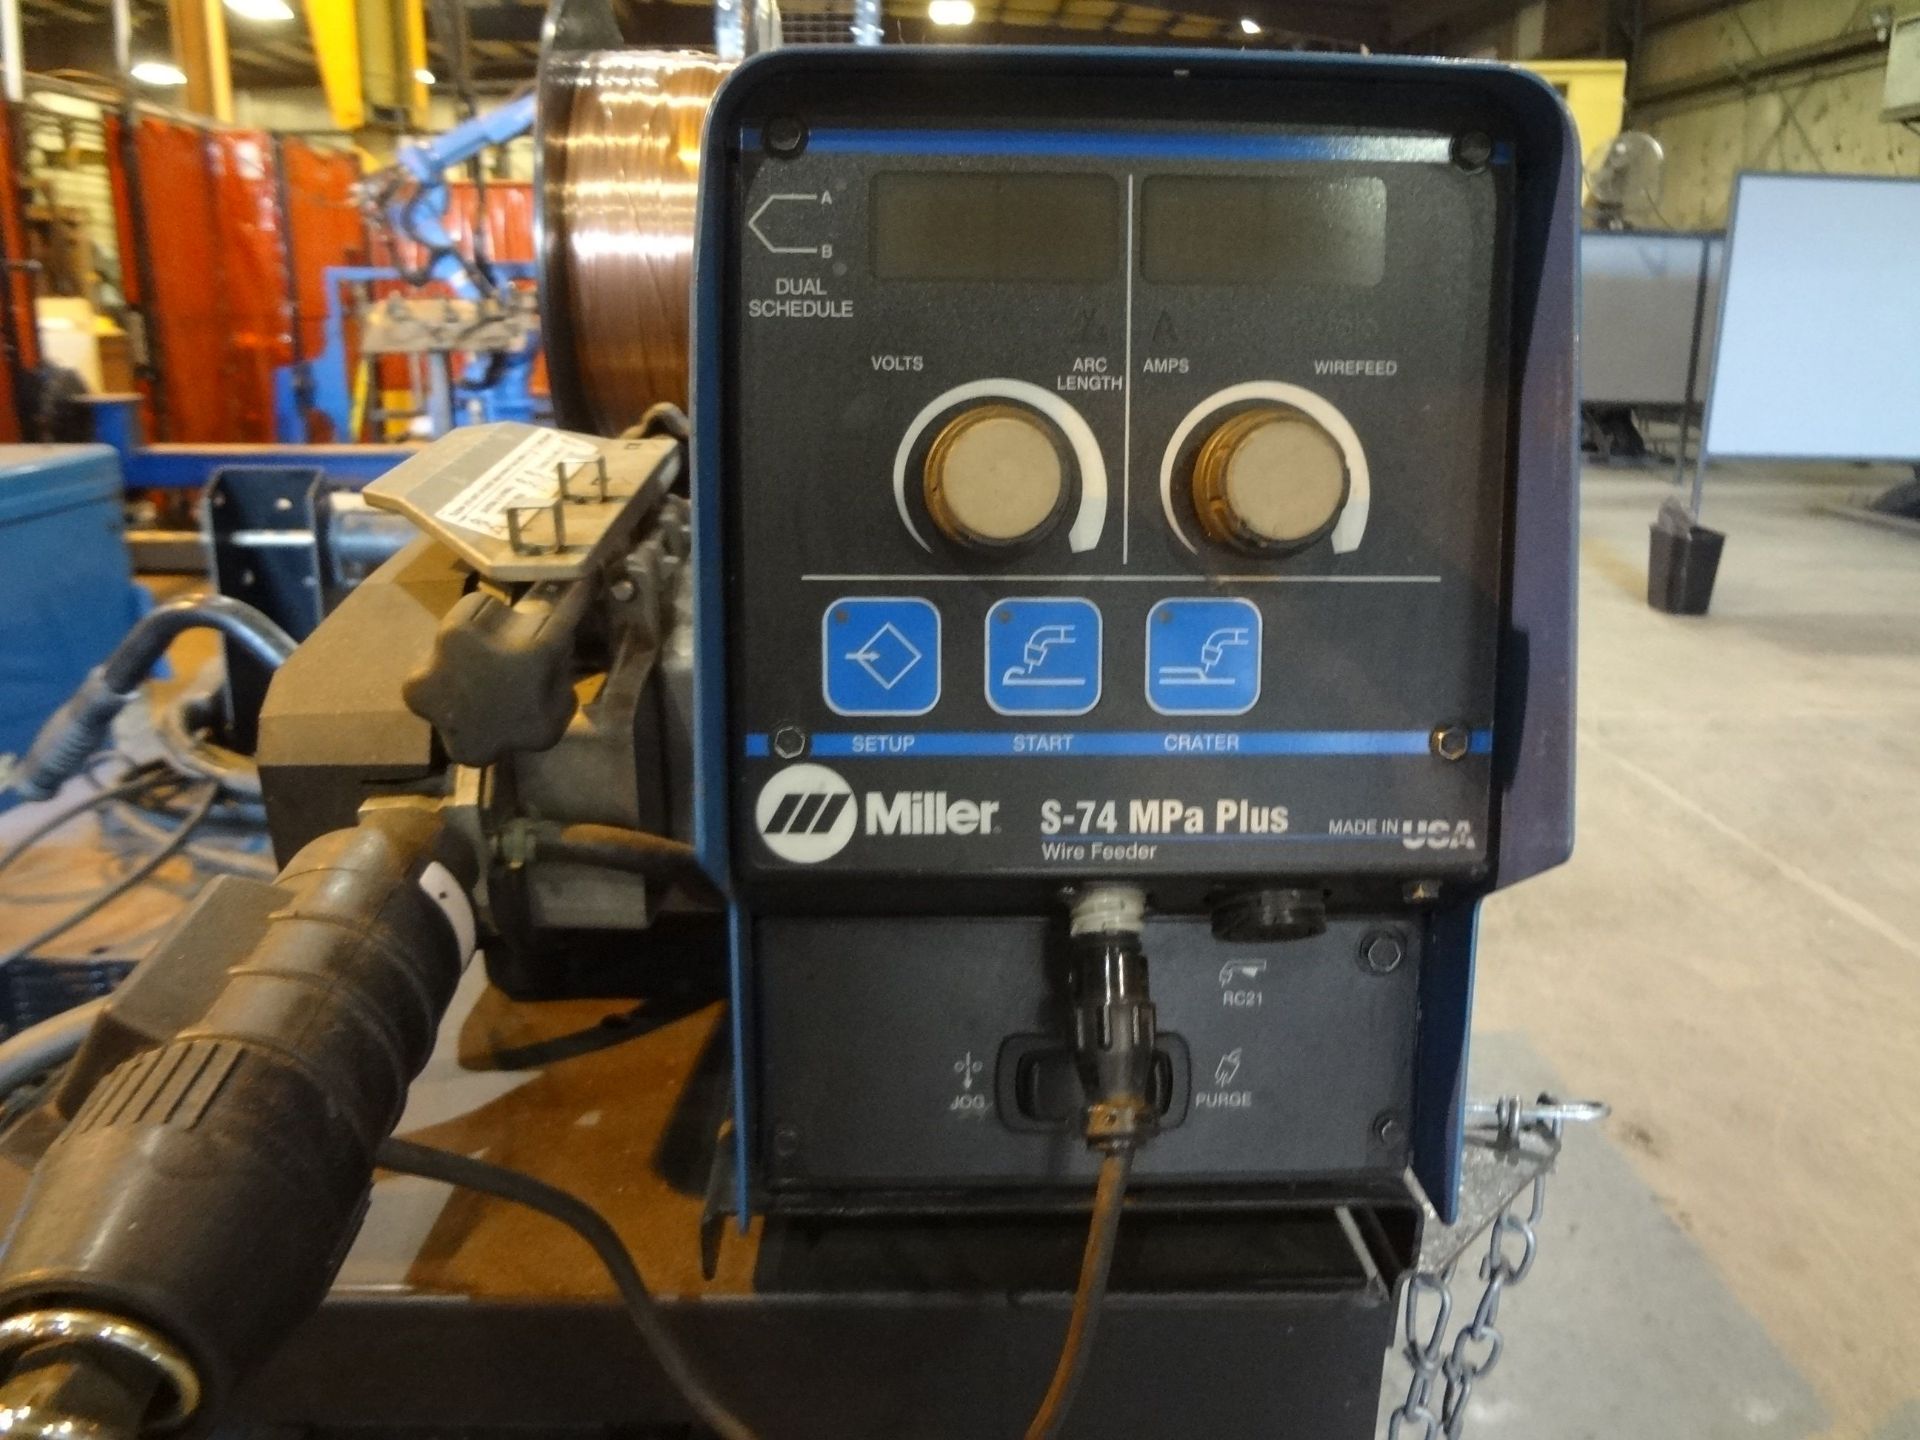 350 AMP MILLER XMT 350 MPA AUTOLINE WELDER; S/N MA490333A, W/ MILLER S-74 MPA PLUS WIRE FEEDER - Image 3 of 3